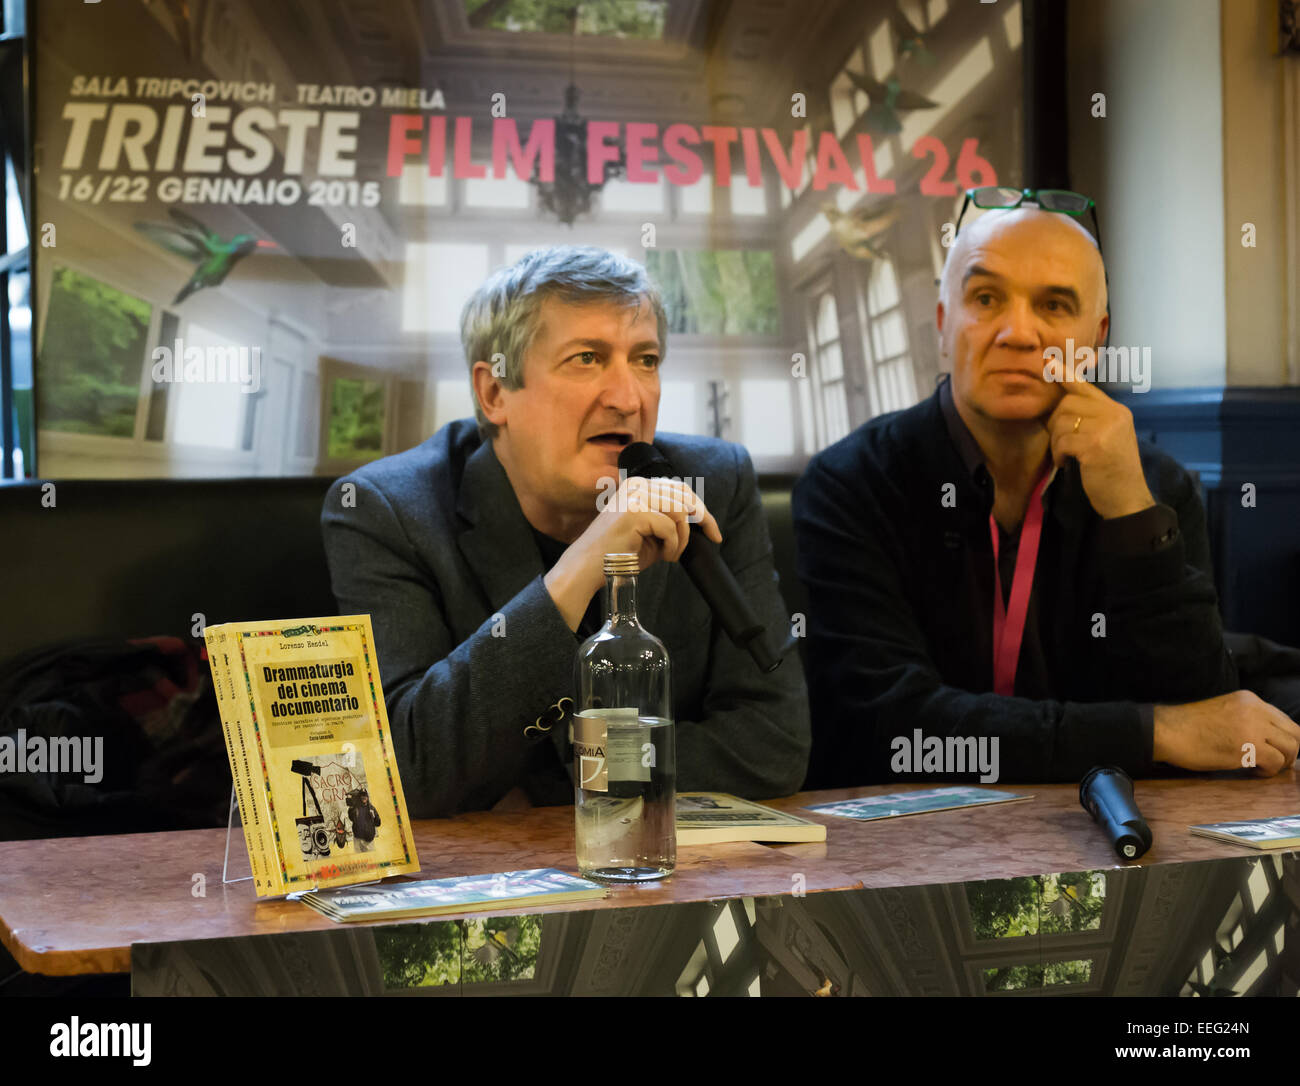 Trieste, Italy. 17th Jan 2015. Q&A with the Authors in the Antico Caffe San Marco during the 26th edition of the Trieste Film Festival Stock Photo